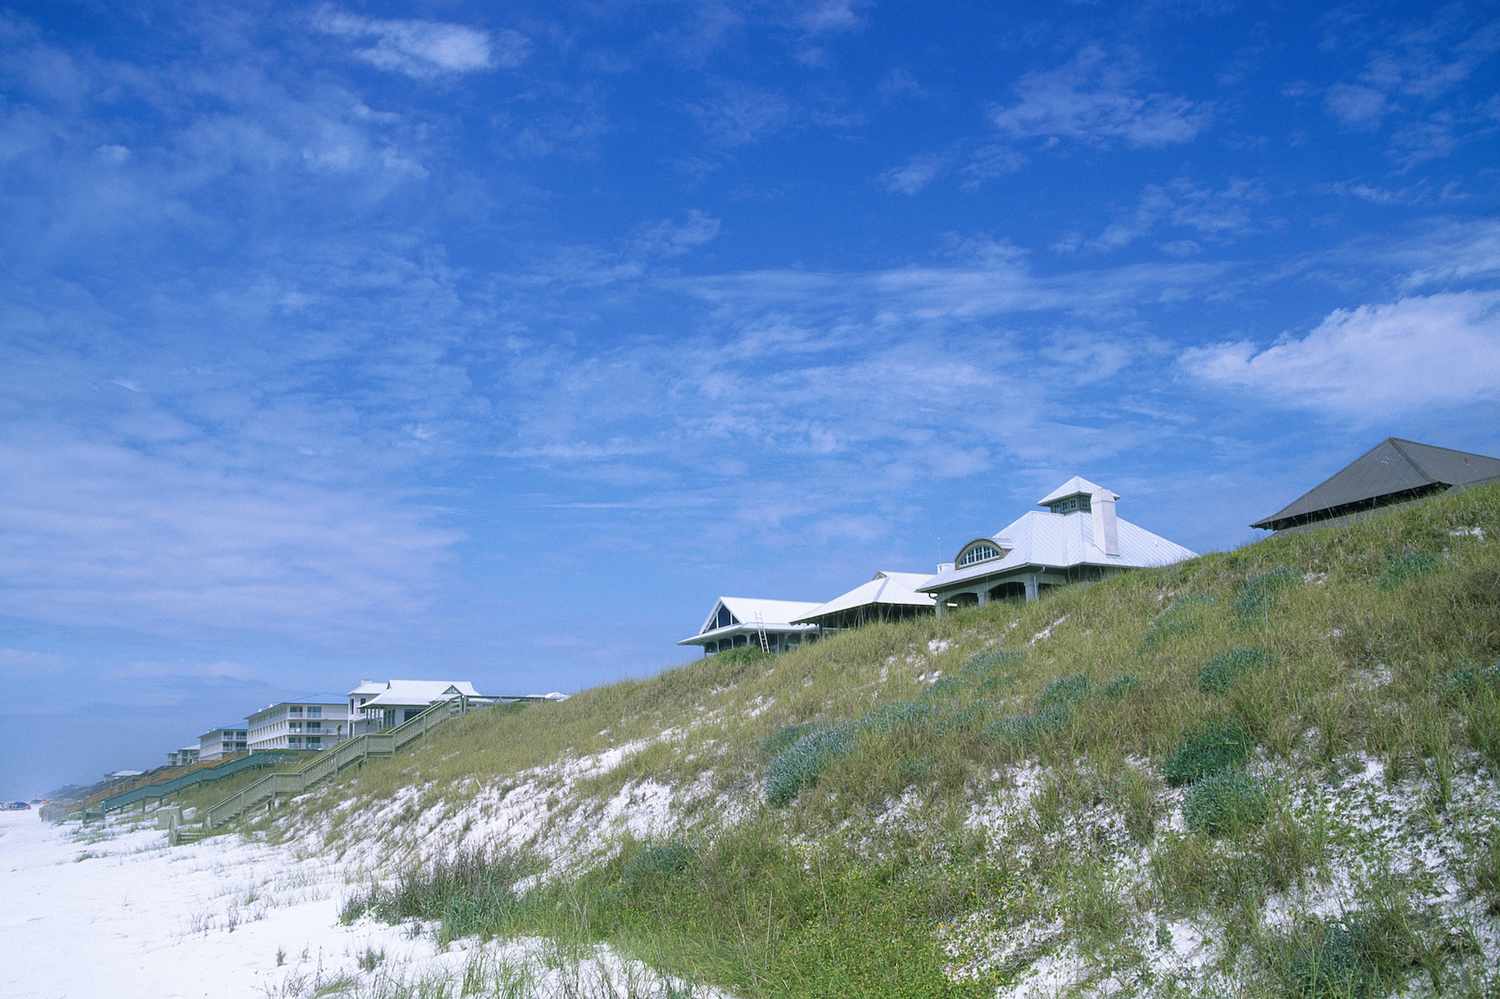 sandy dunes with grasses and houses in Rosemary Beach, Florida